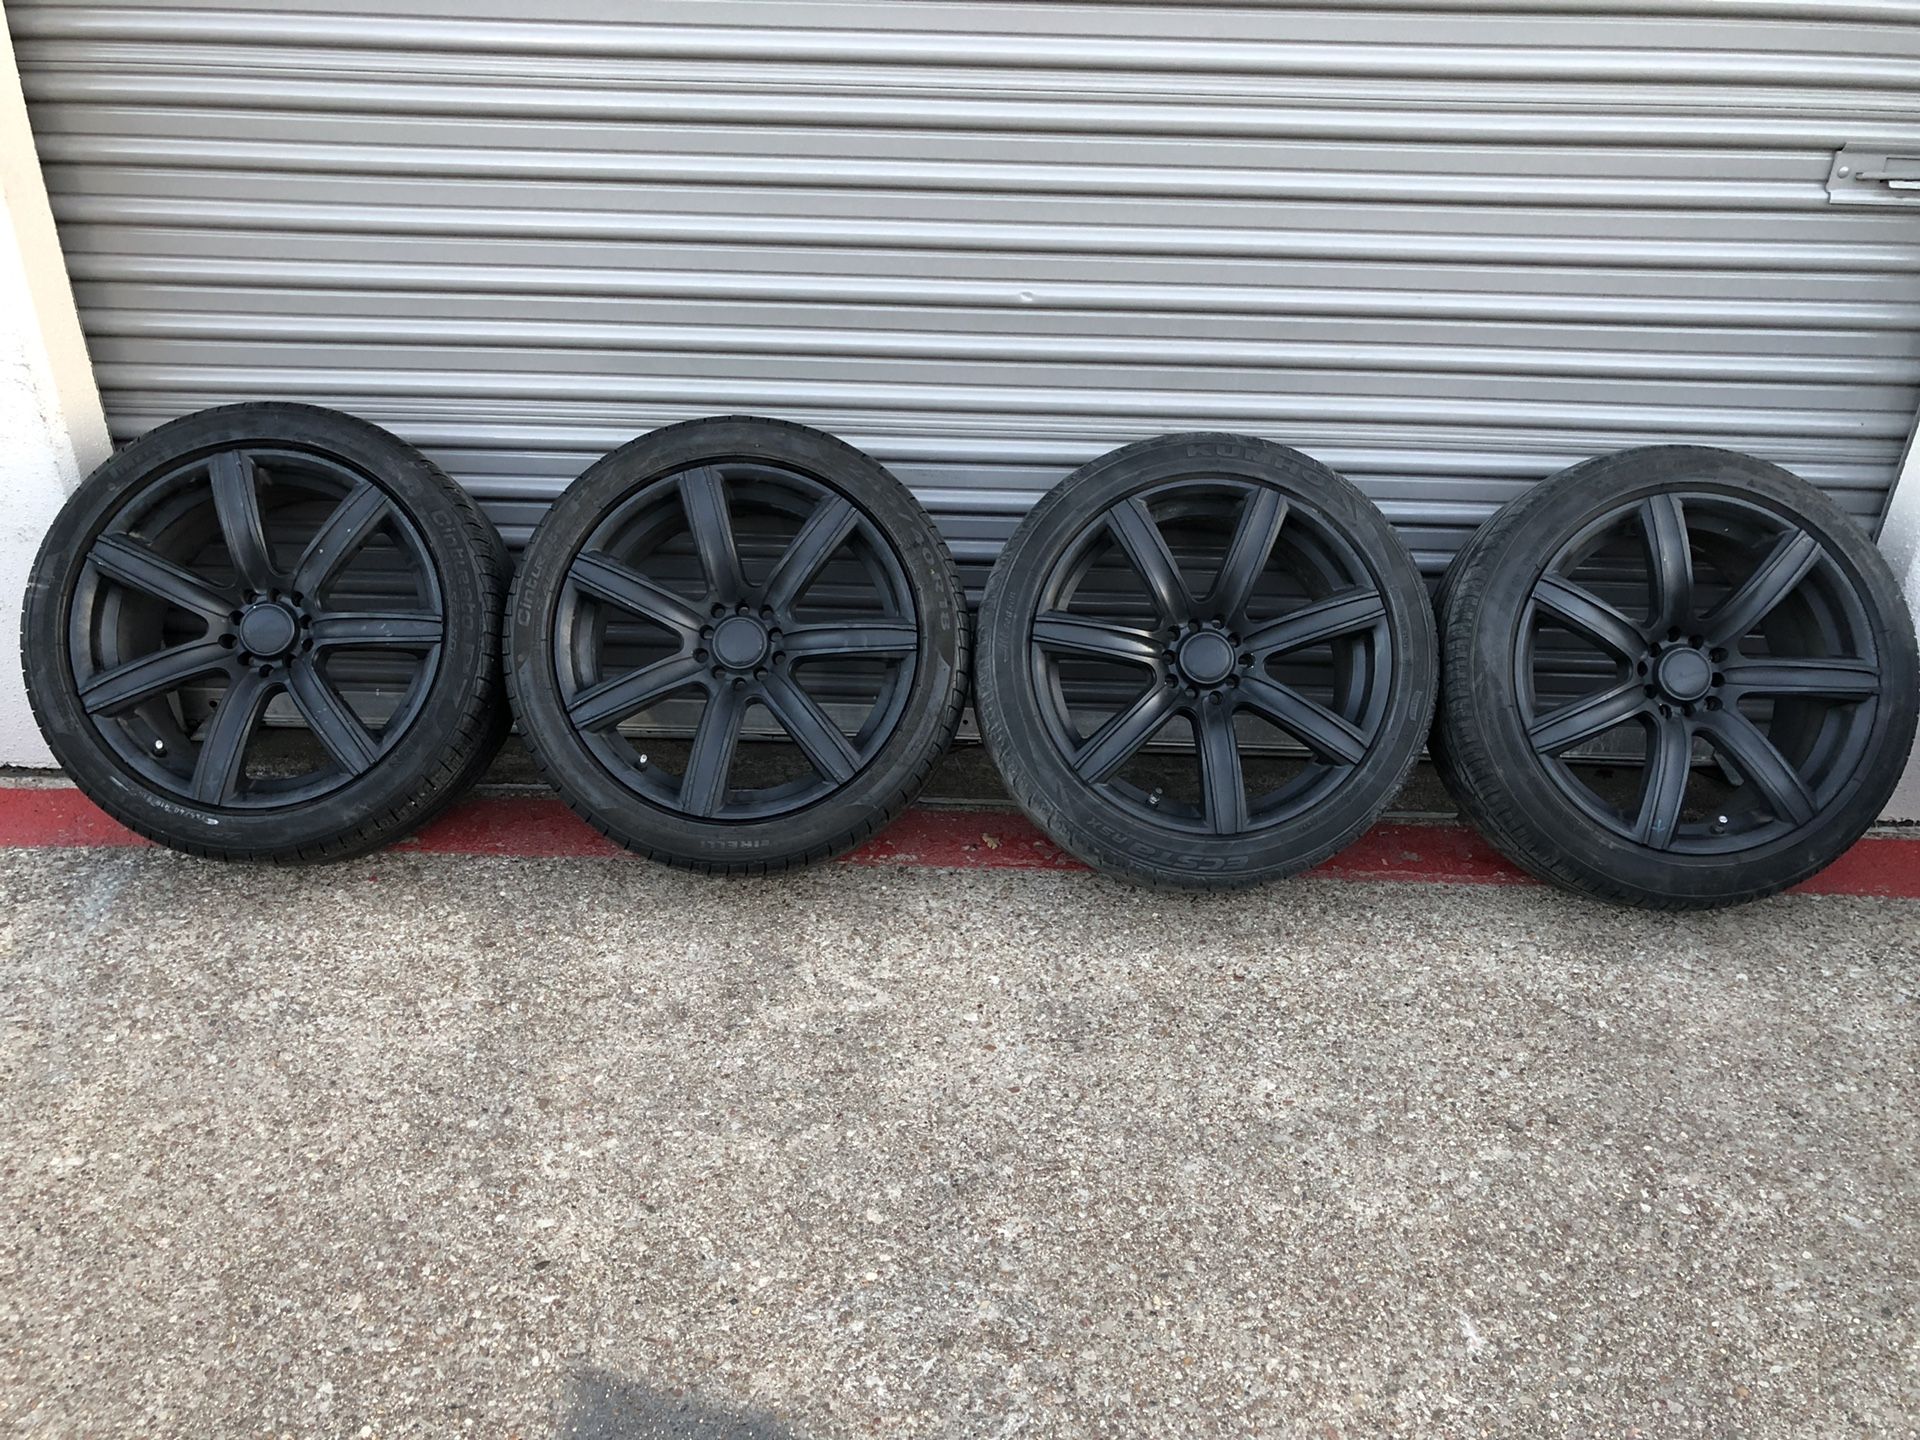 18” MB black rims with staggered tires